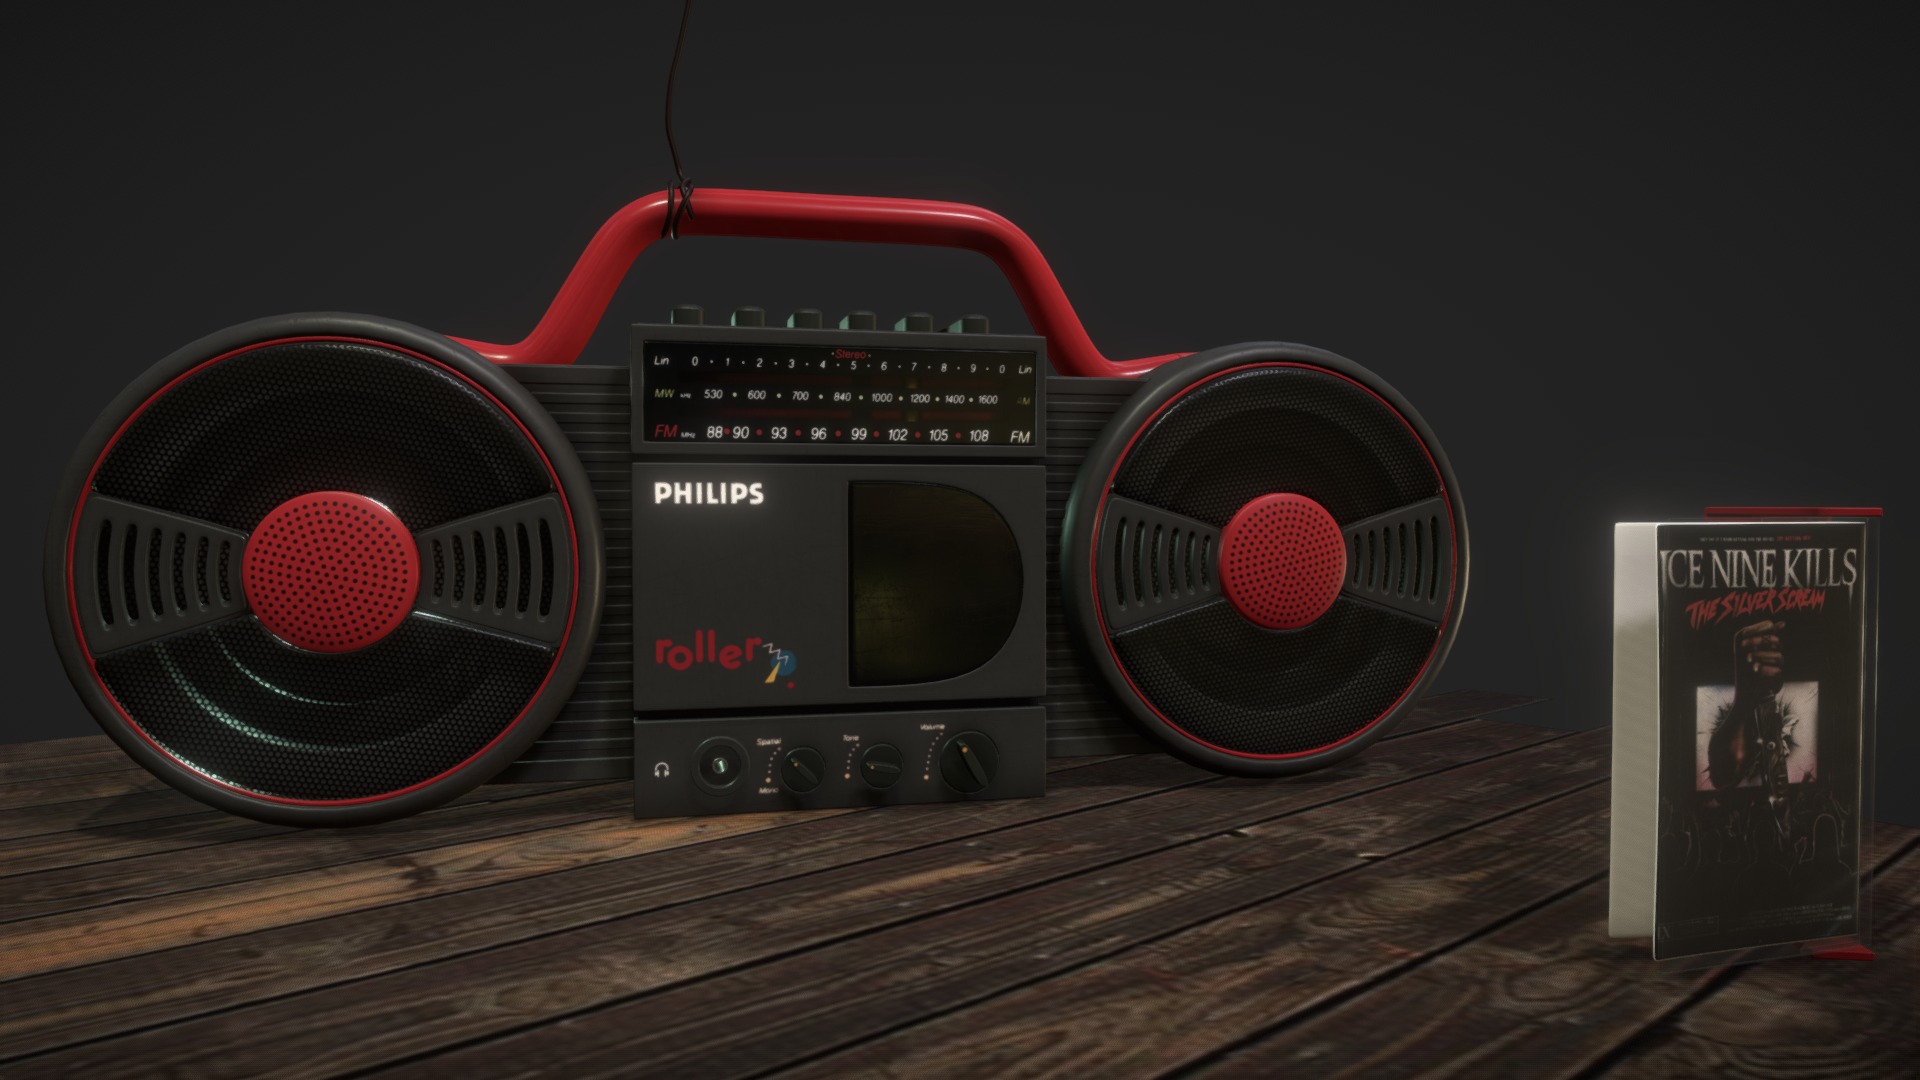 3D model Philips Roller – IT Edition - This is a 3D model of the Philips Roller - IT Edition. The 3D model is about a camera with a red light.